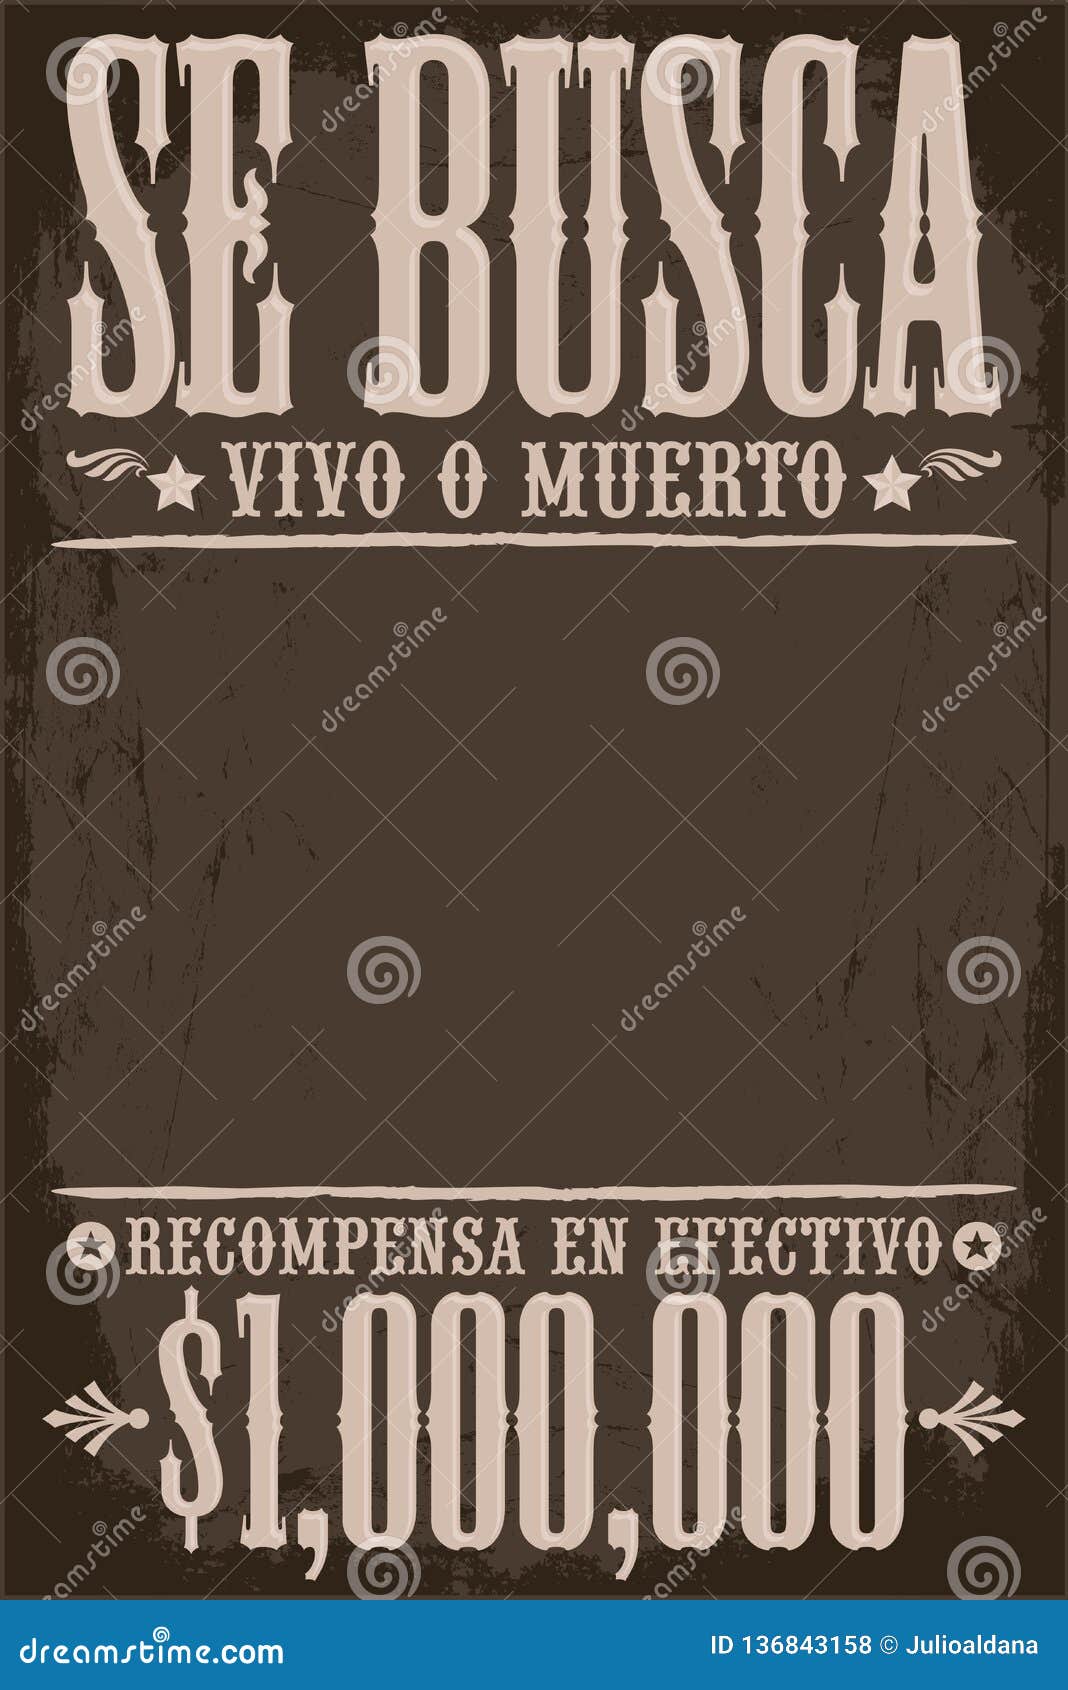 se busca vivo o muerto, wanted dead or alive poster spanish text template